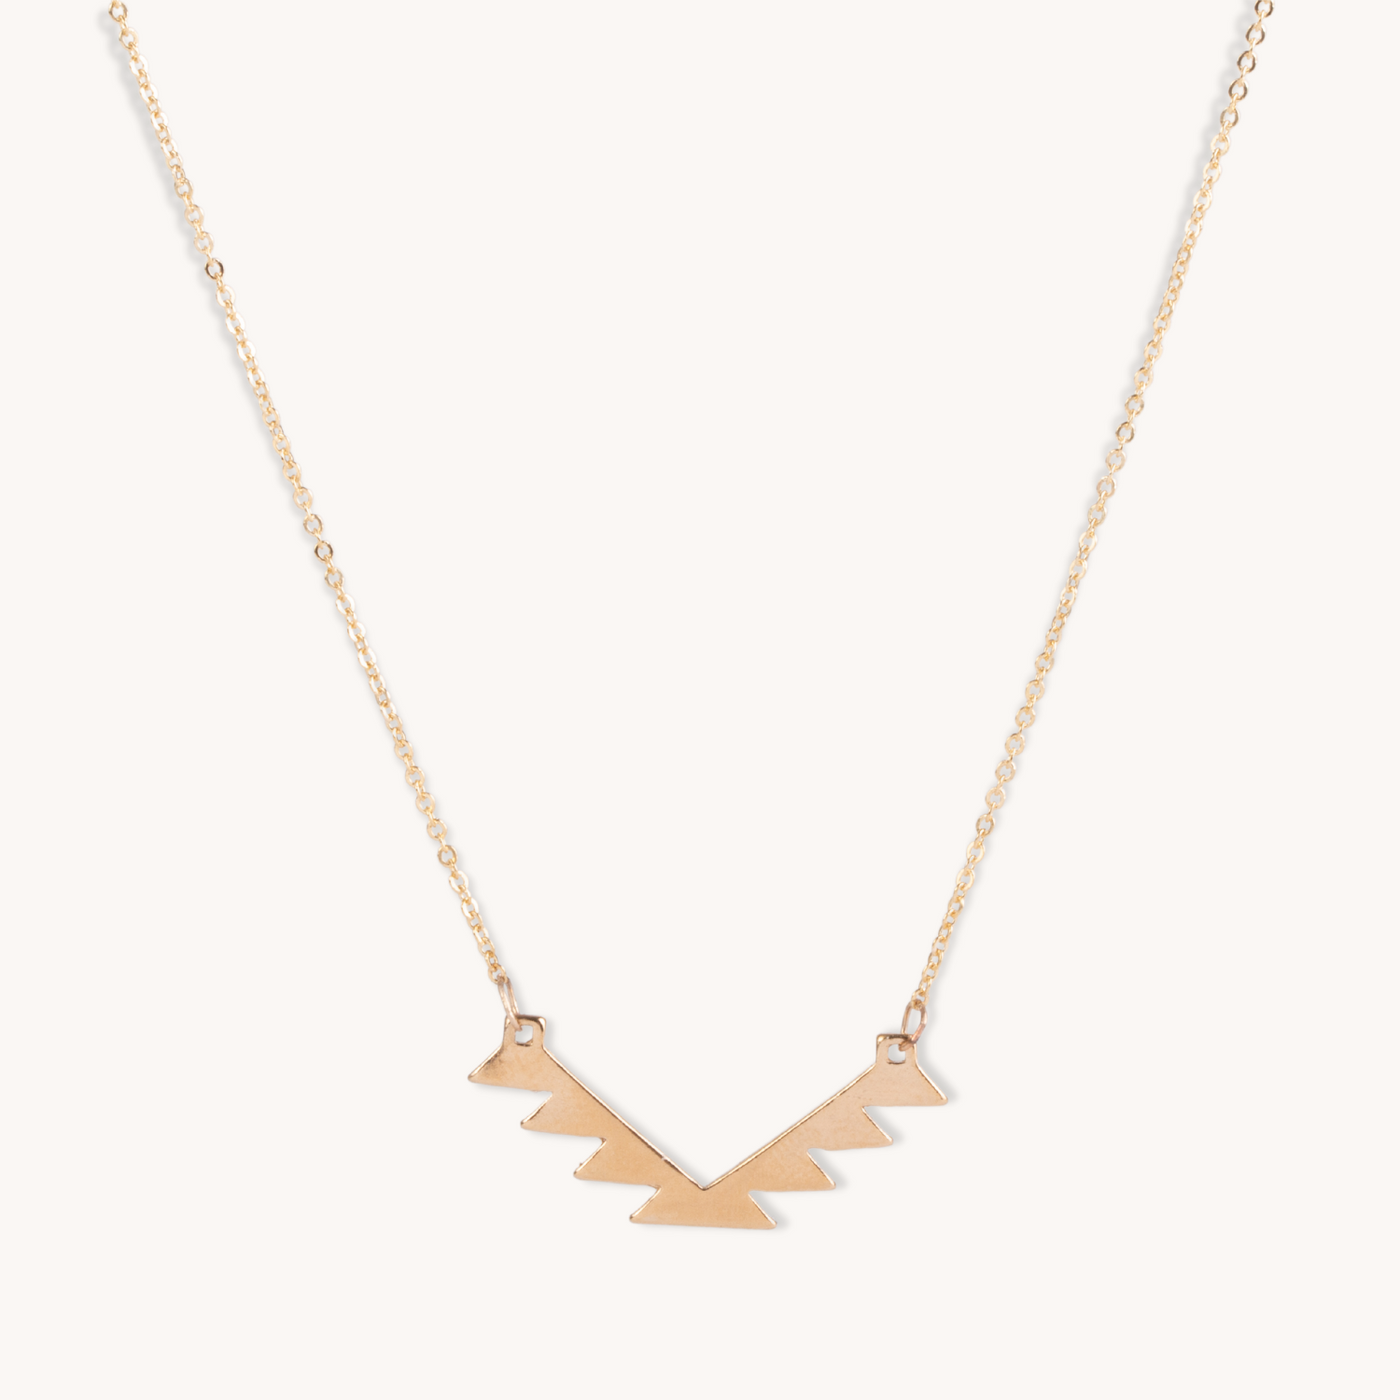 Gold Vermeil Bar Necklace by TSkies